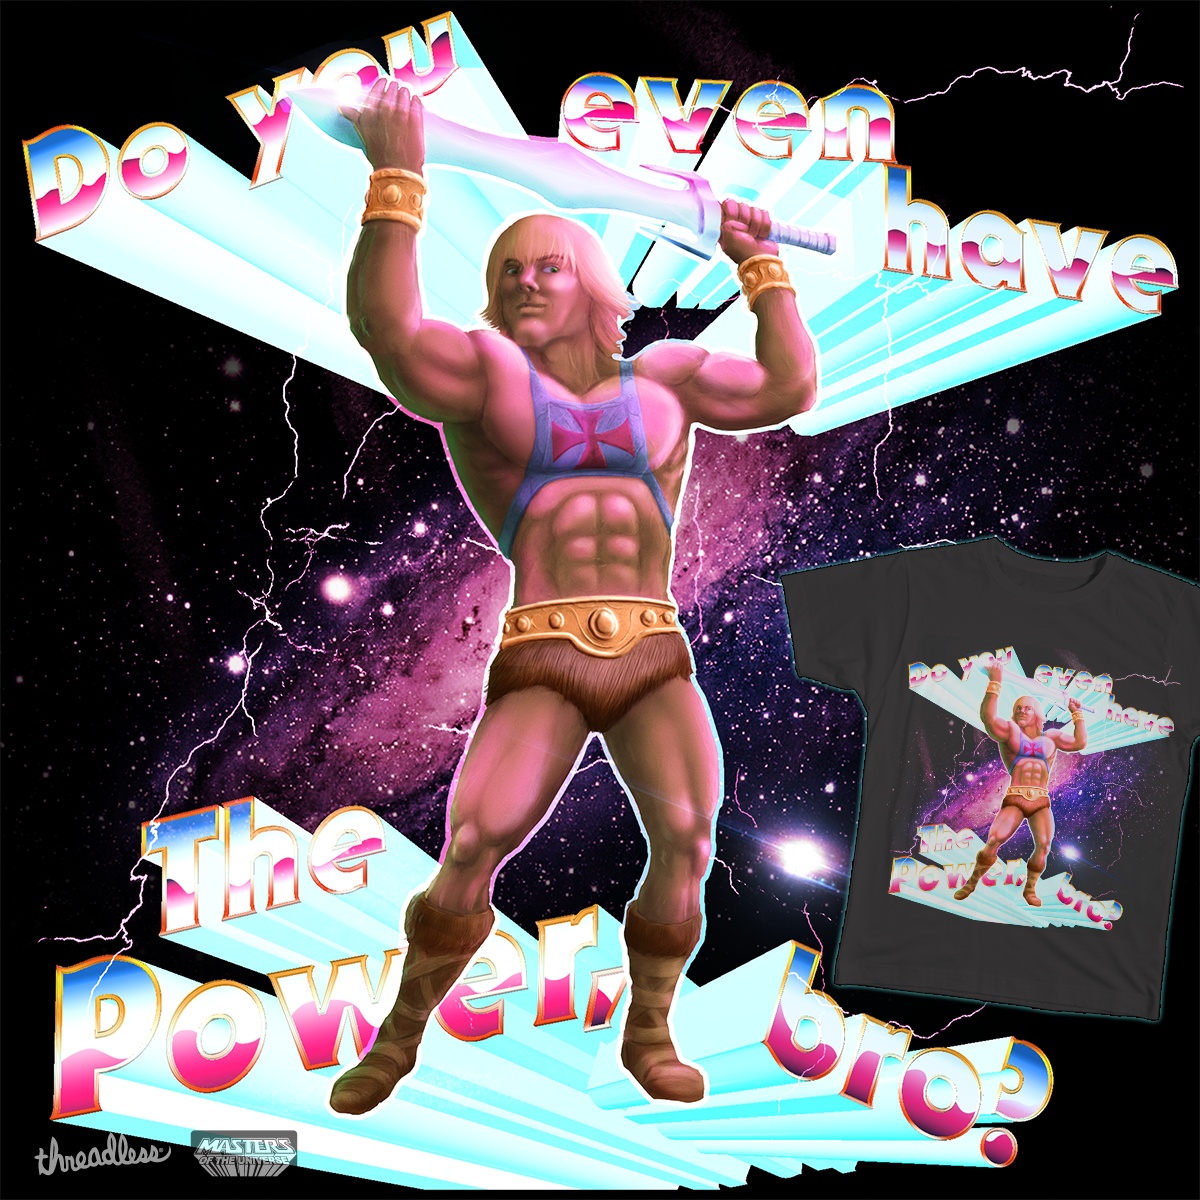 Do you even have the power, bro?, a cool t-shirt design